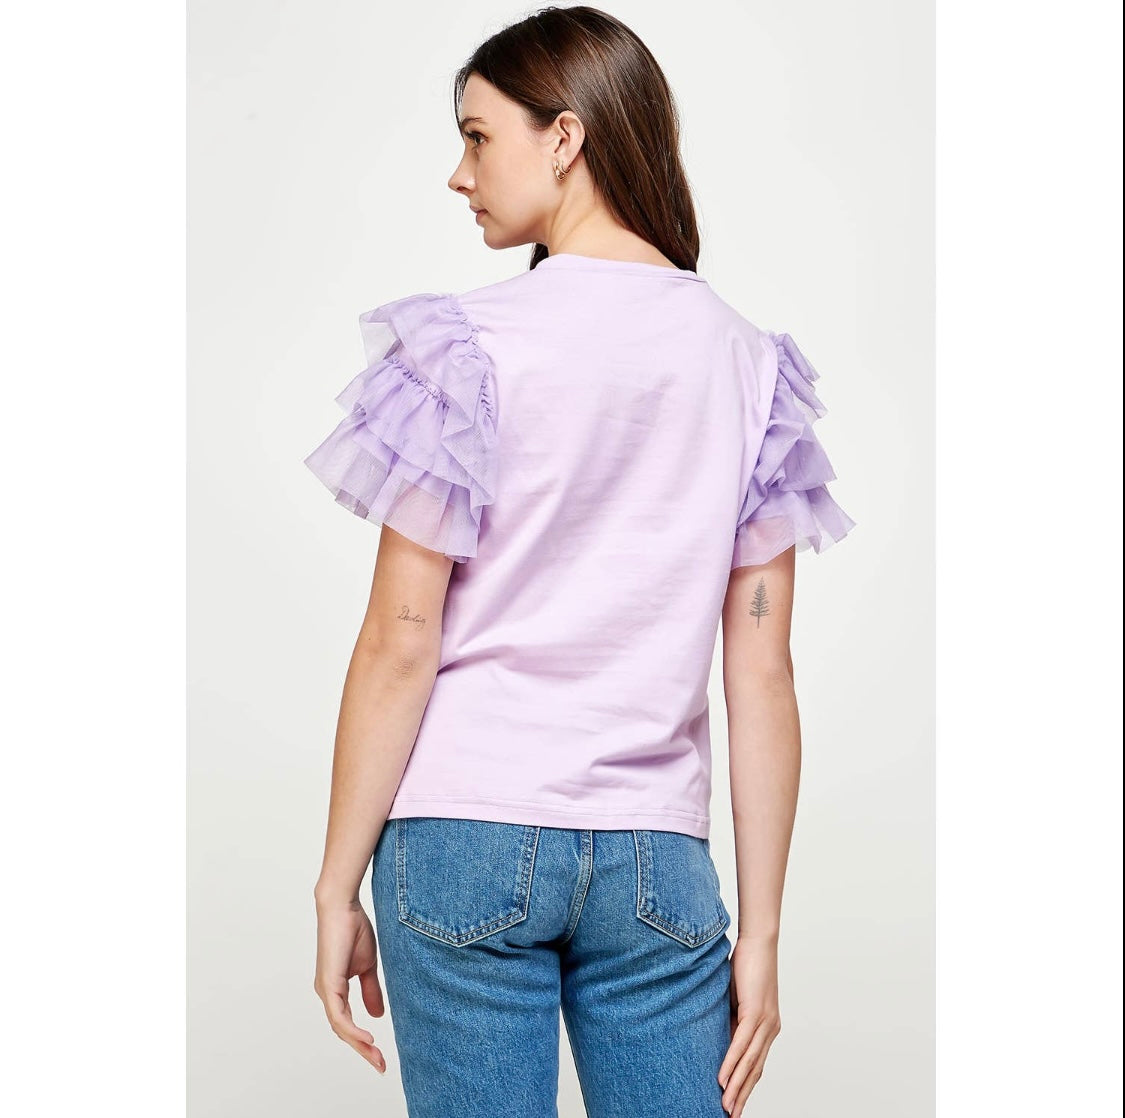 Lilac ruffle frill tulle tee top